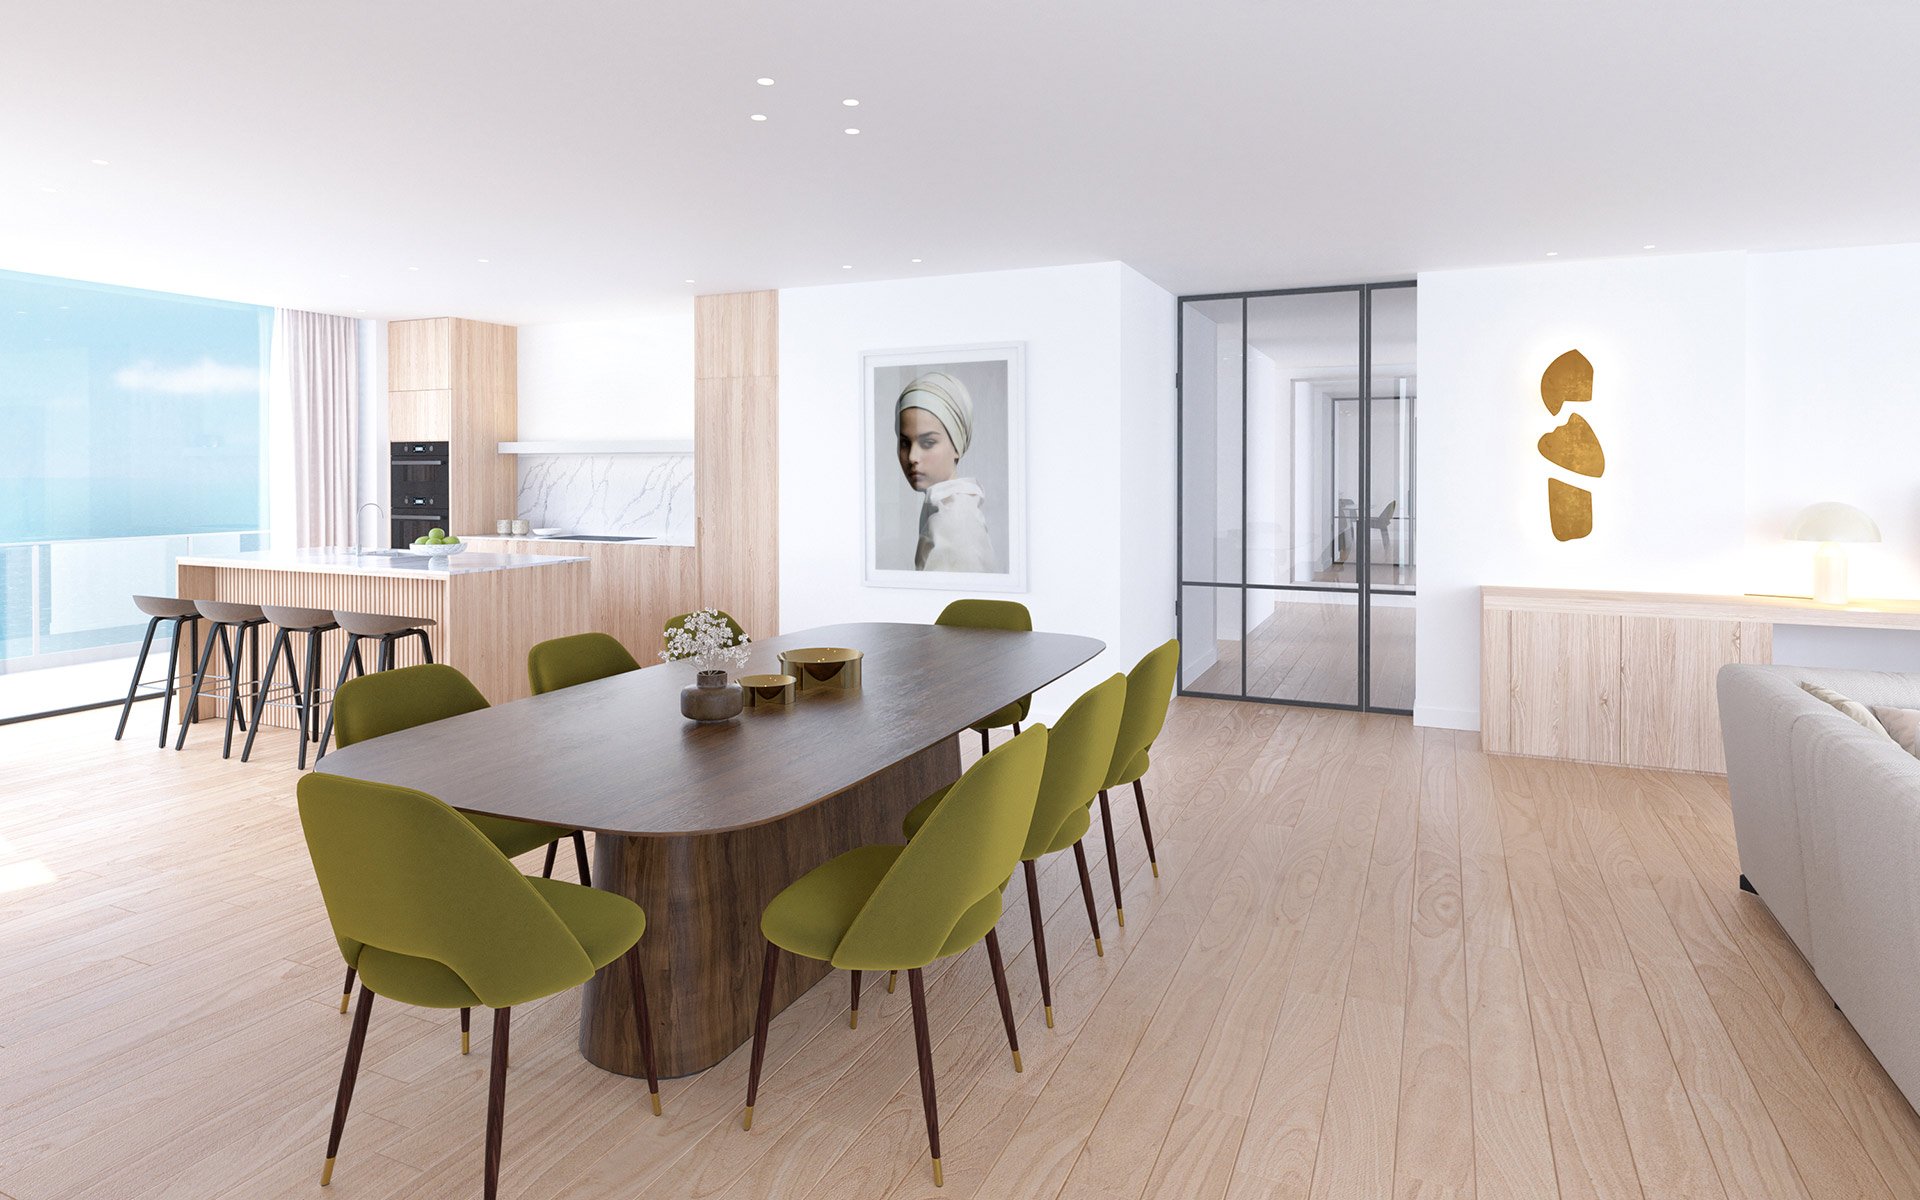 The Dining Area in the Leas Pavilion showflat built by Top 100 construction company Ant Yapi